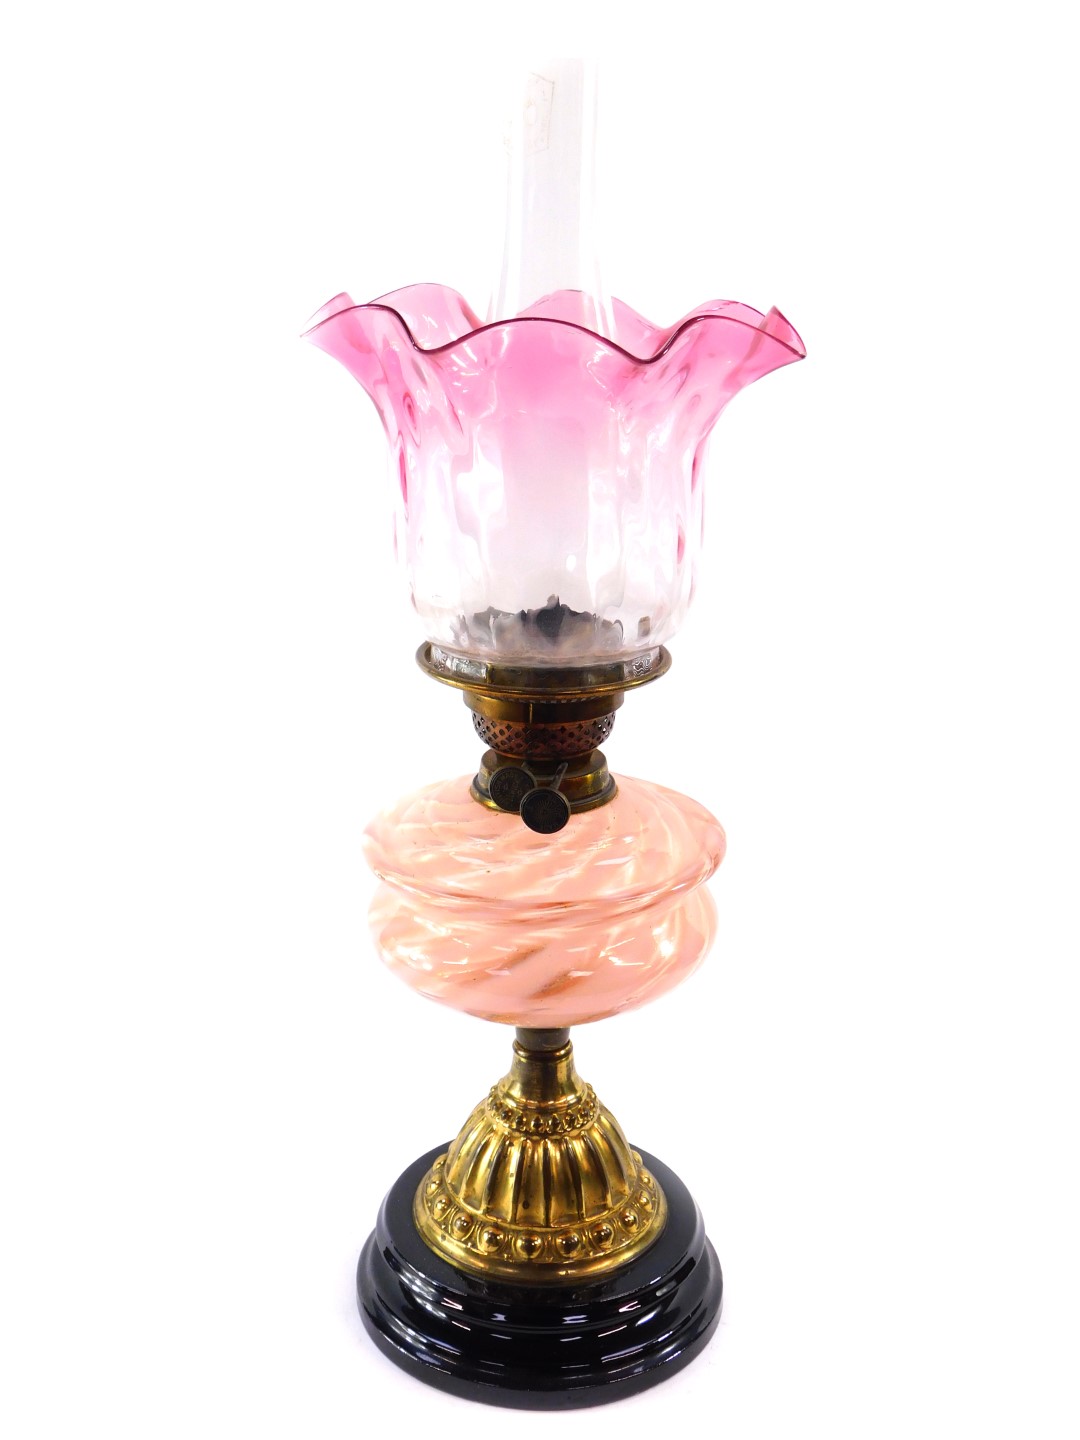 A Duplex early 20thC brass oil lamp, with a pink clear and pearlescent glass reservoir, glass